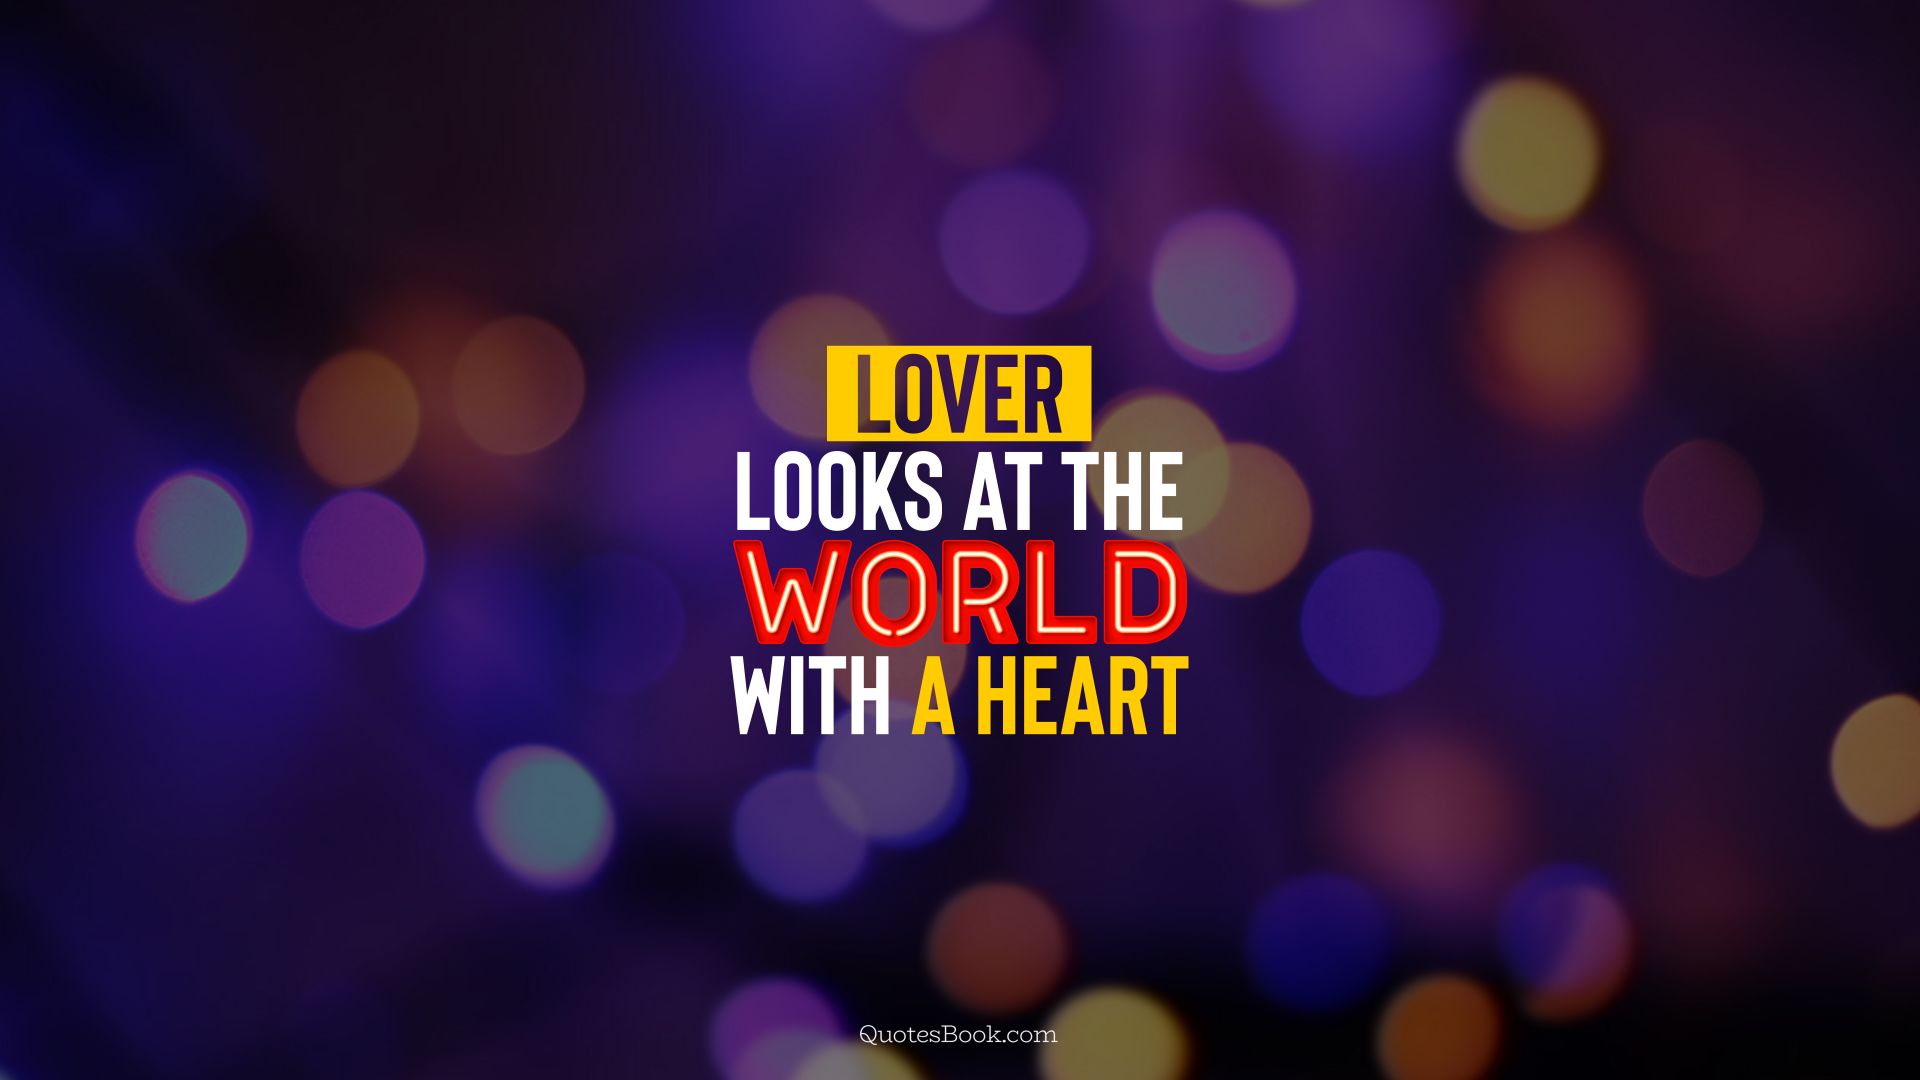 Lover looks at the world with a heart. - Quote by QuotesBook